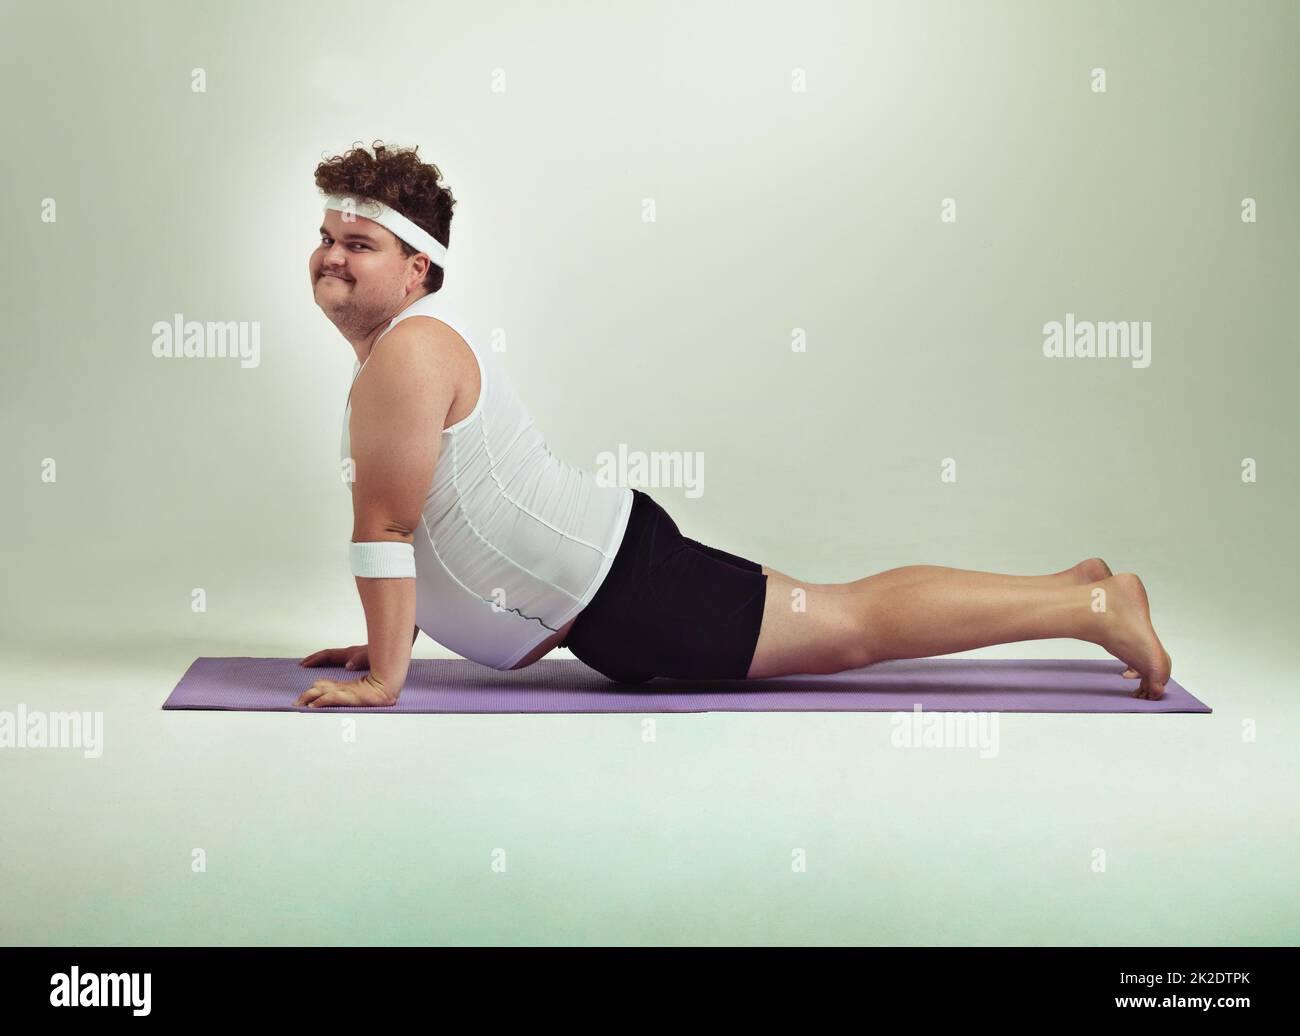 This upward facing dog pose is great. Shot of an overweight man doing yoga poses. Stock Photo